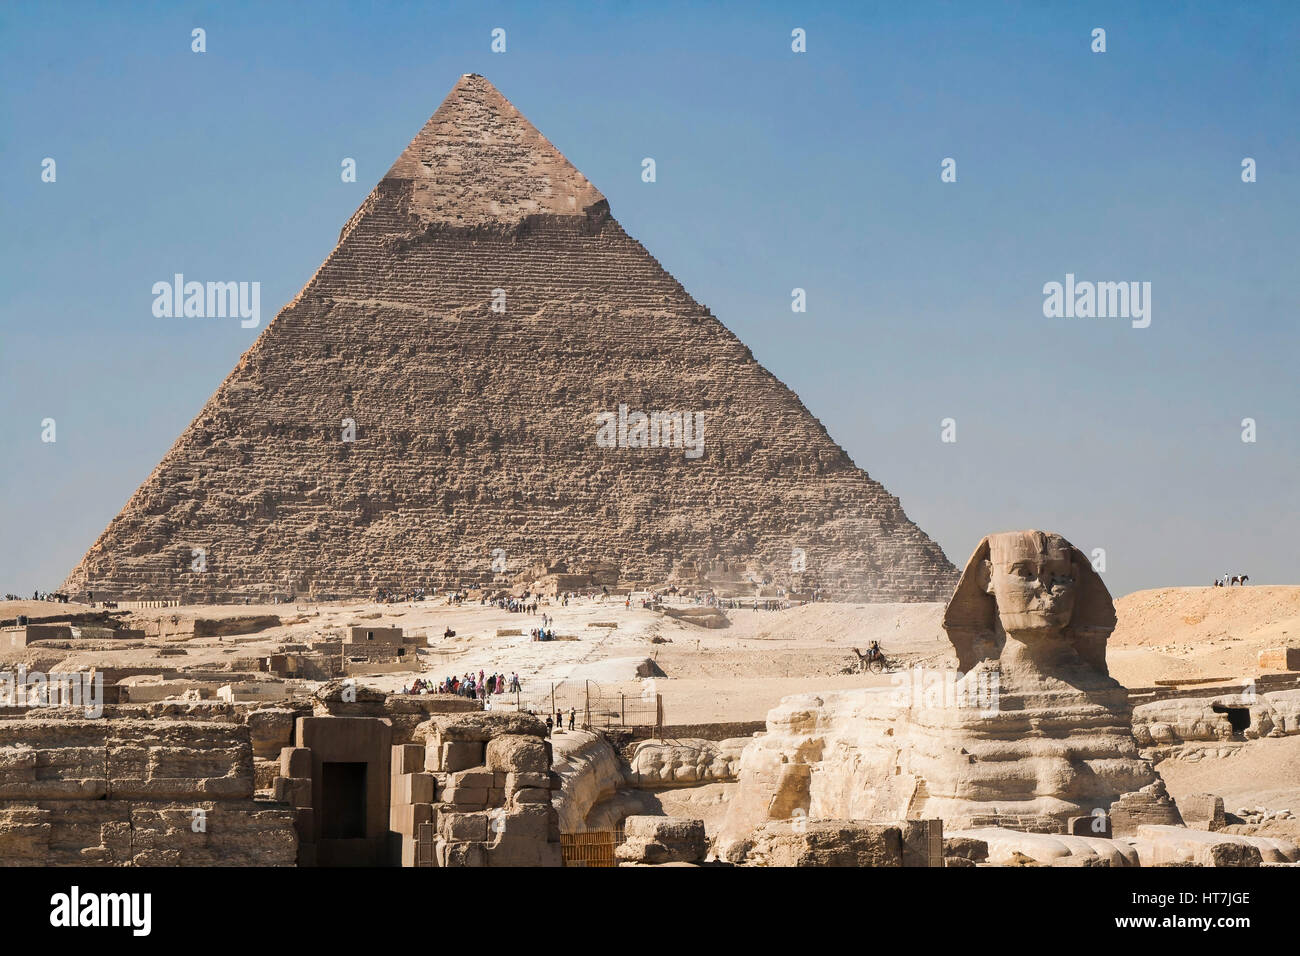 Great Pyramid Of Giza And Sphinx In Egypt Stock Photo